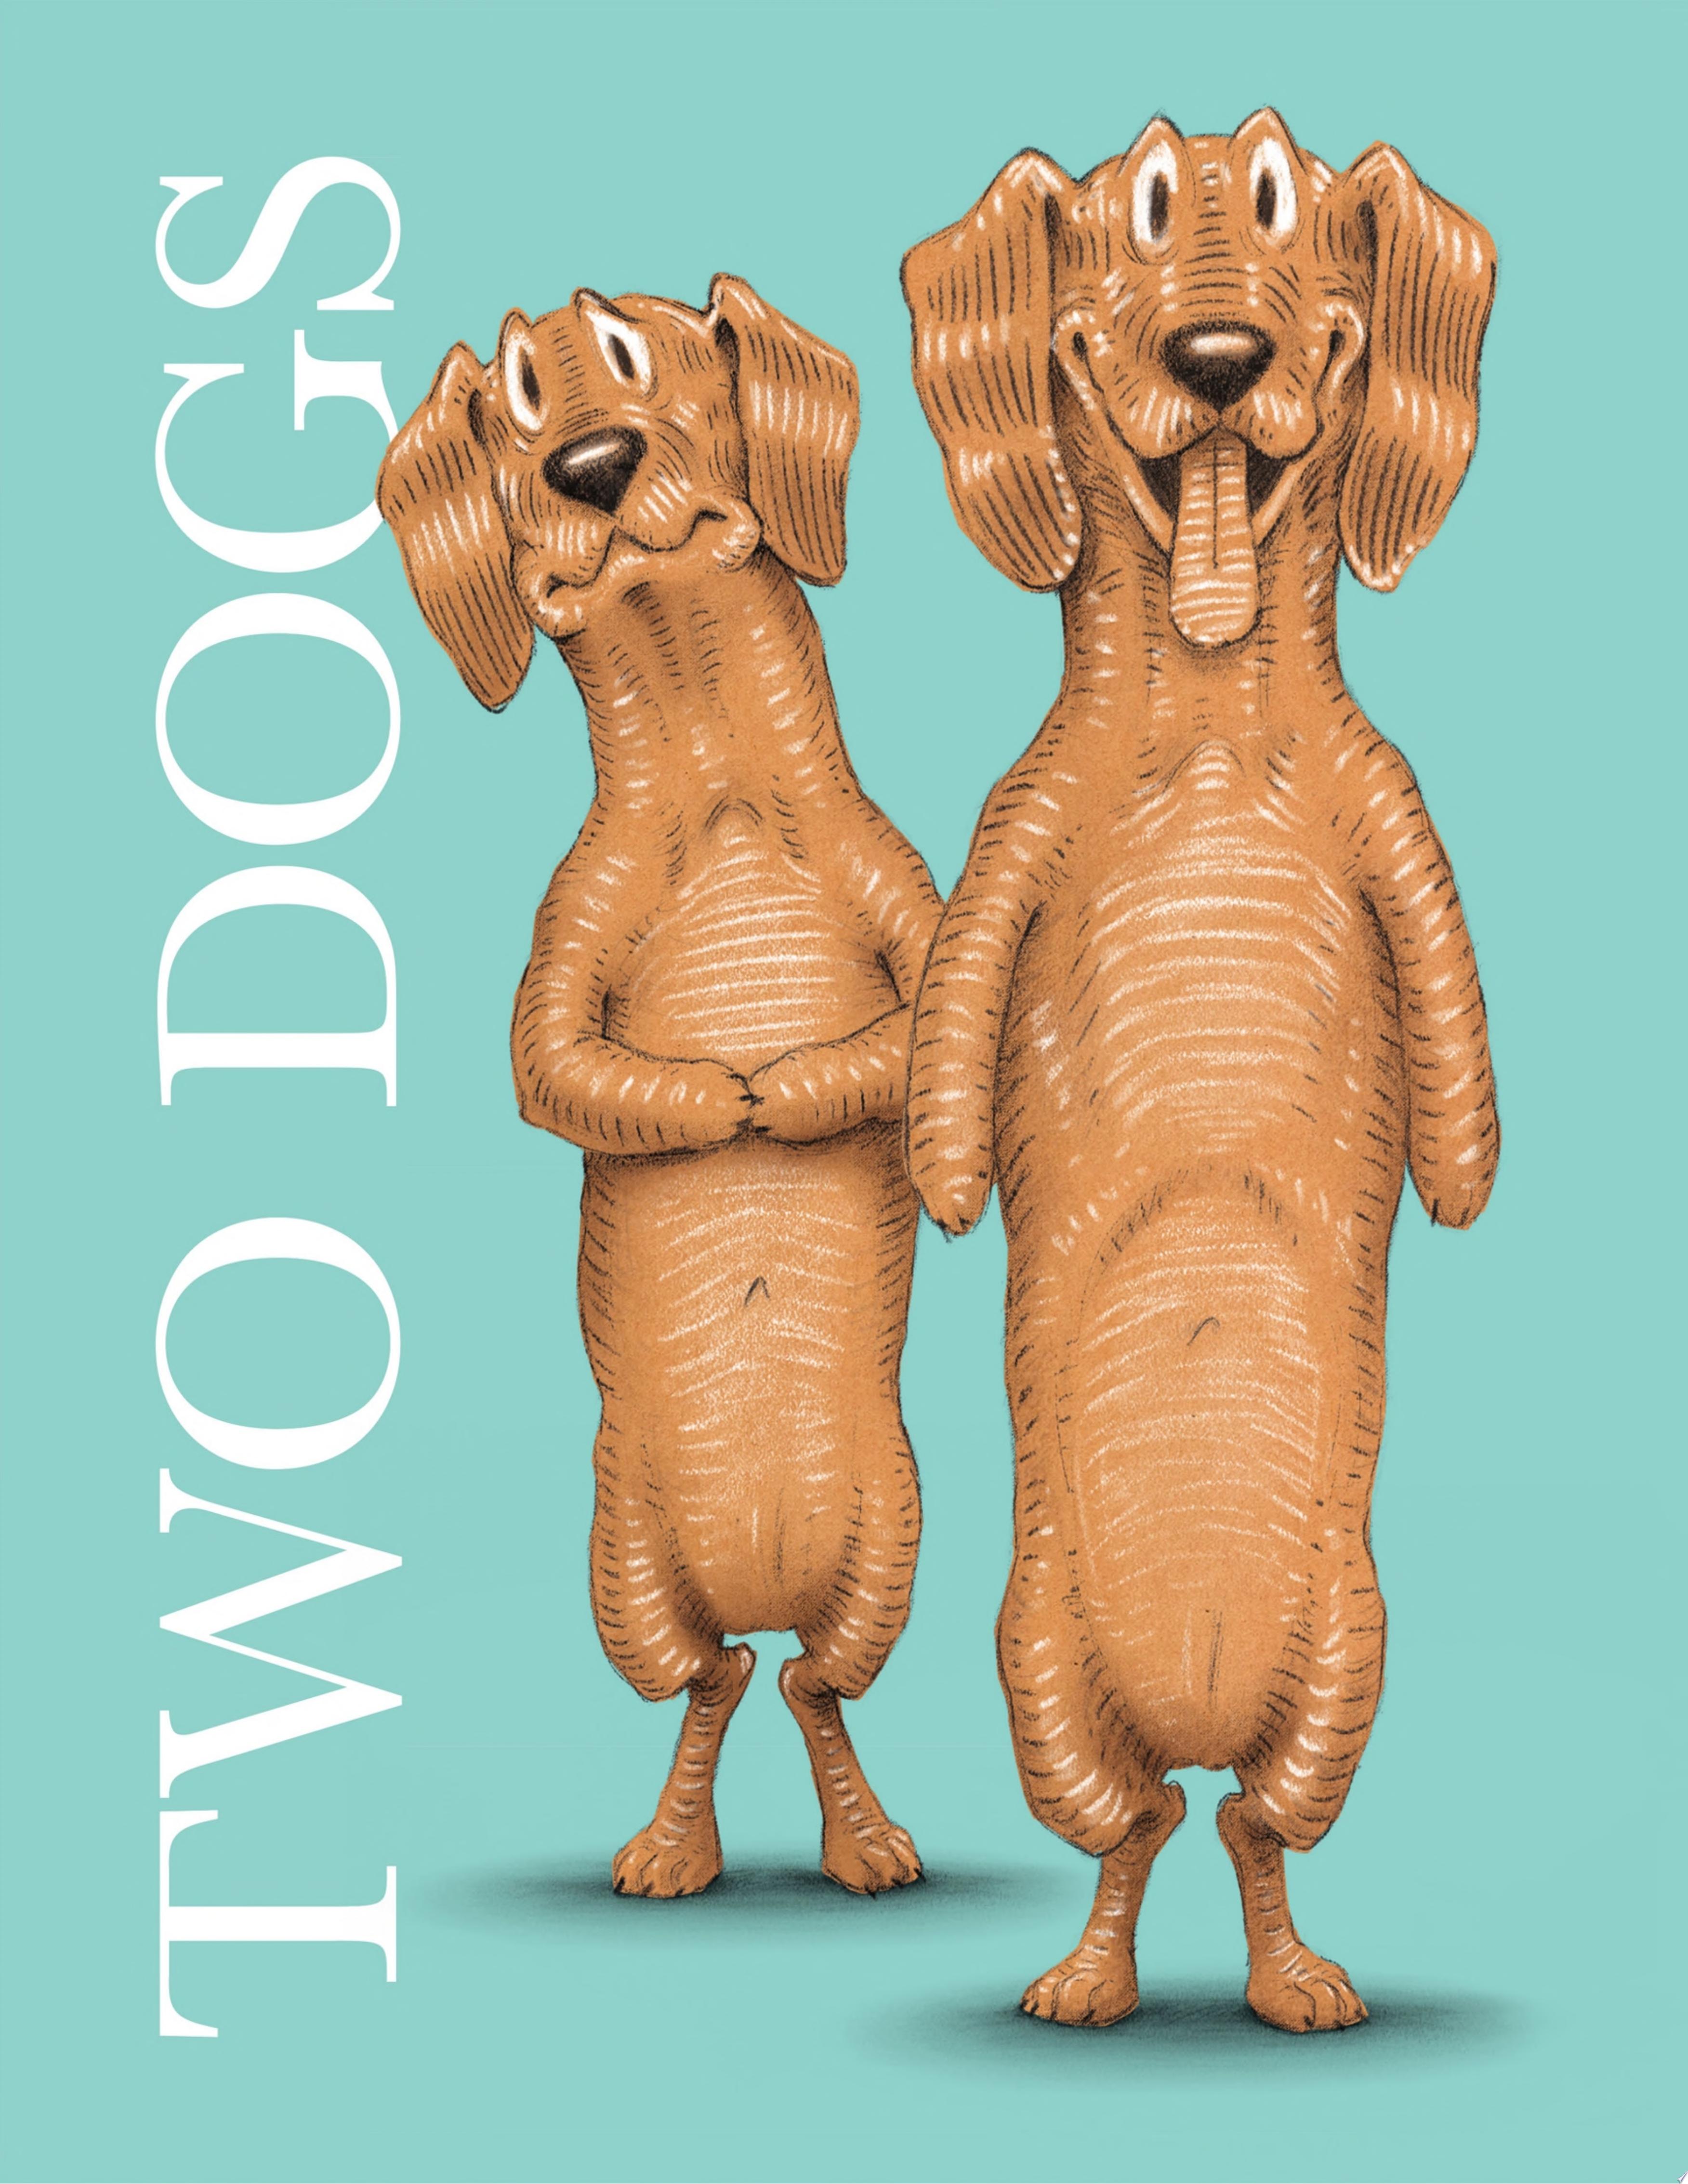 Image for "Two Dogs"